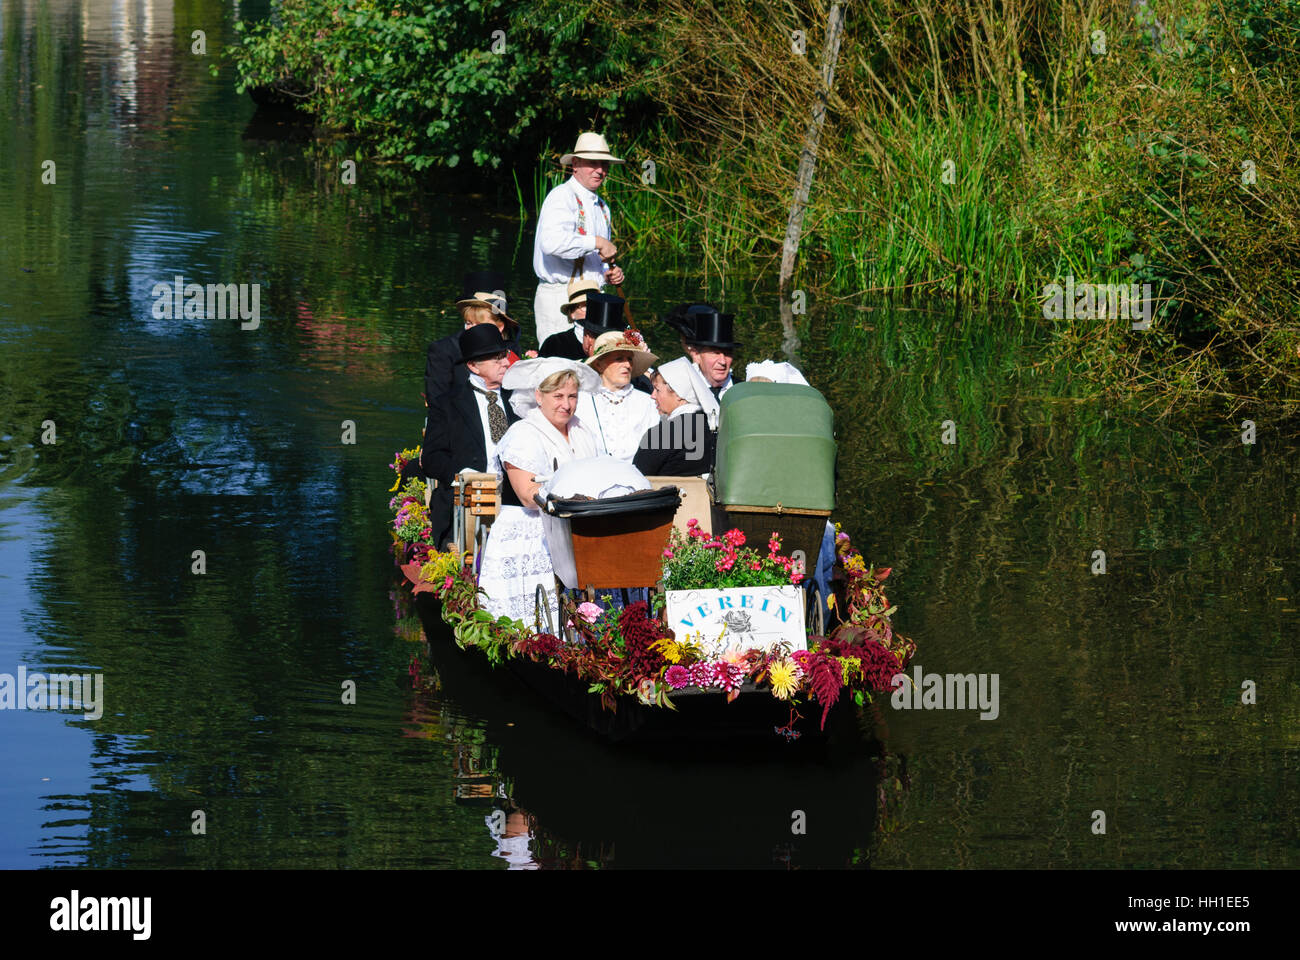 Lübbenau/Spreewald: Small boat with locals dressed in national costume on the journey to a party in the Spreewald, , Brandenburg, Germany Stock Photo